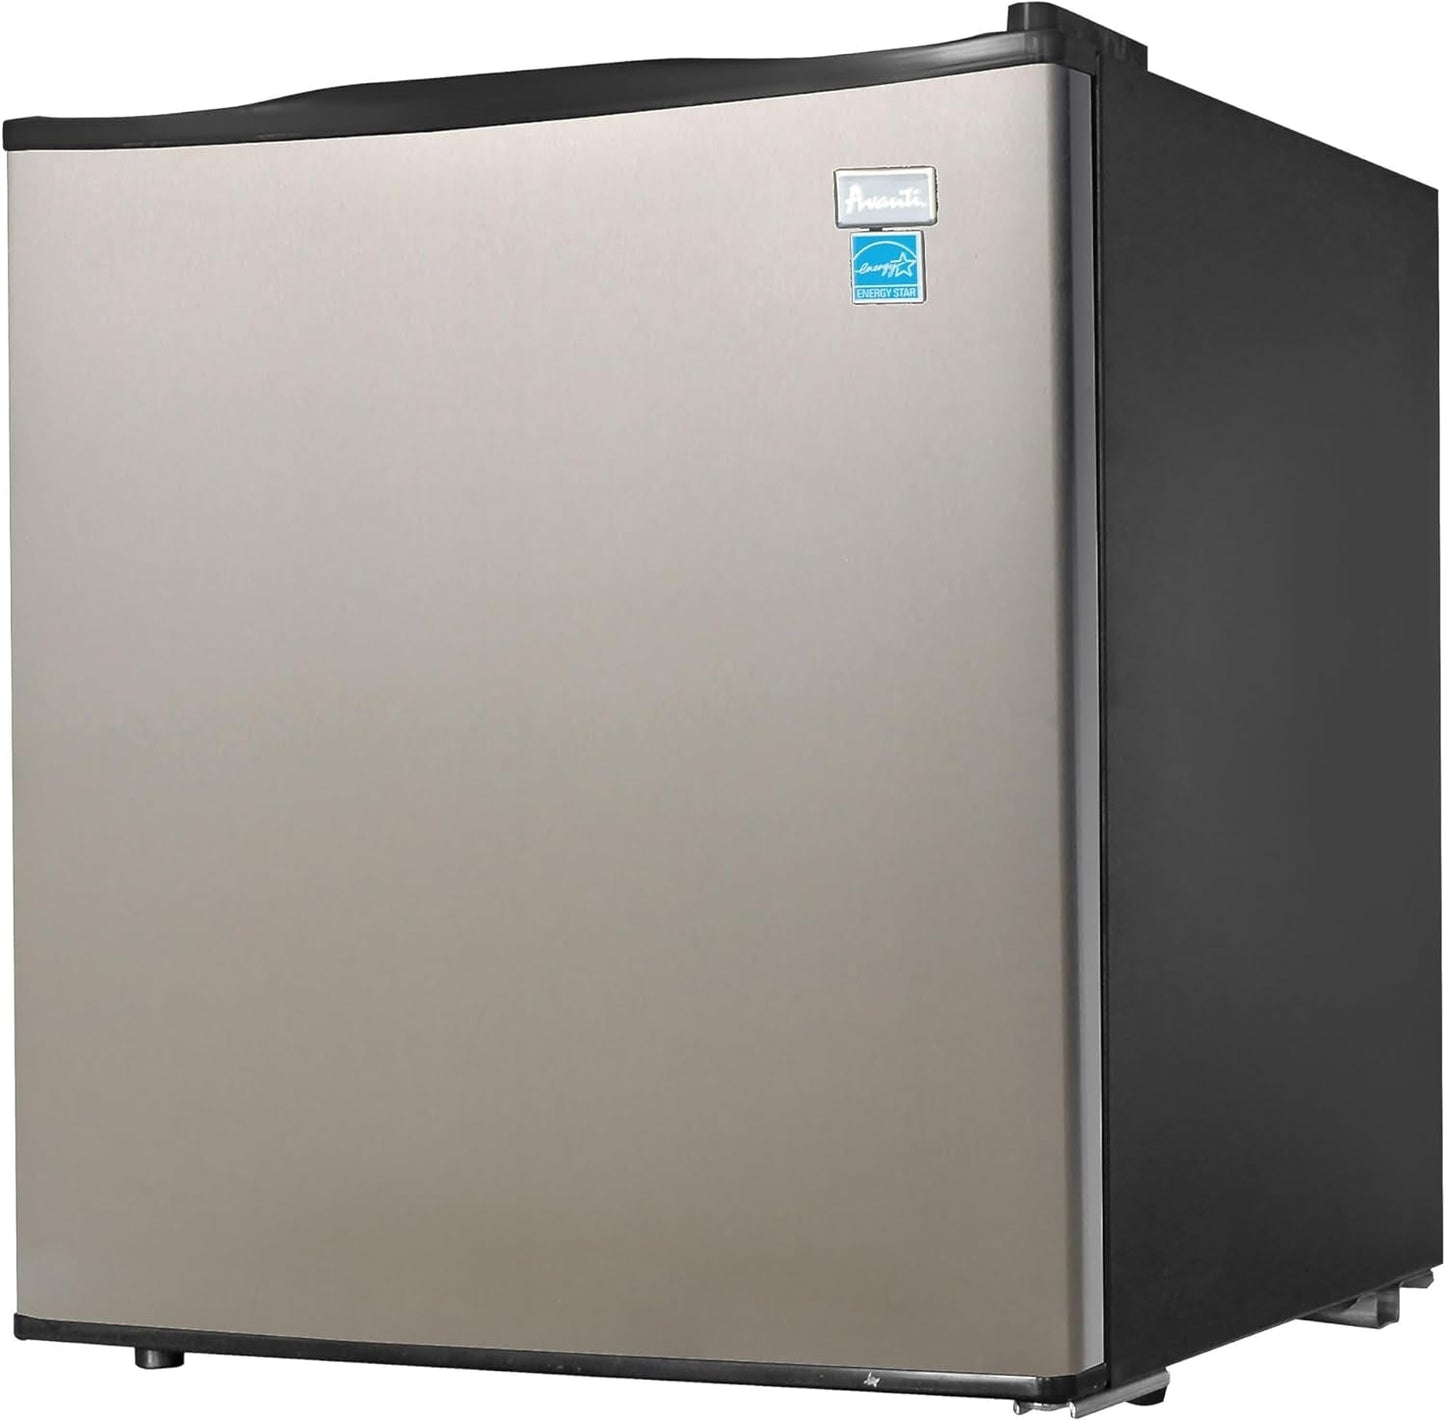 Offer For AR17T3S AR17T 1.7 Cu. Ft. Compact Refrigerator, in Stainless Steel MowerShop